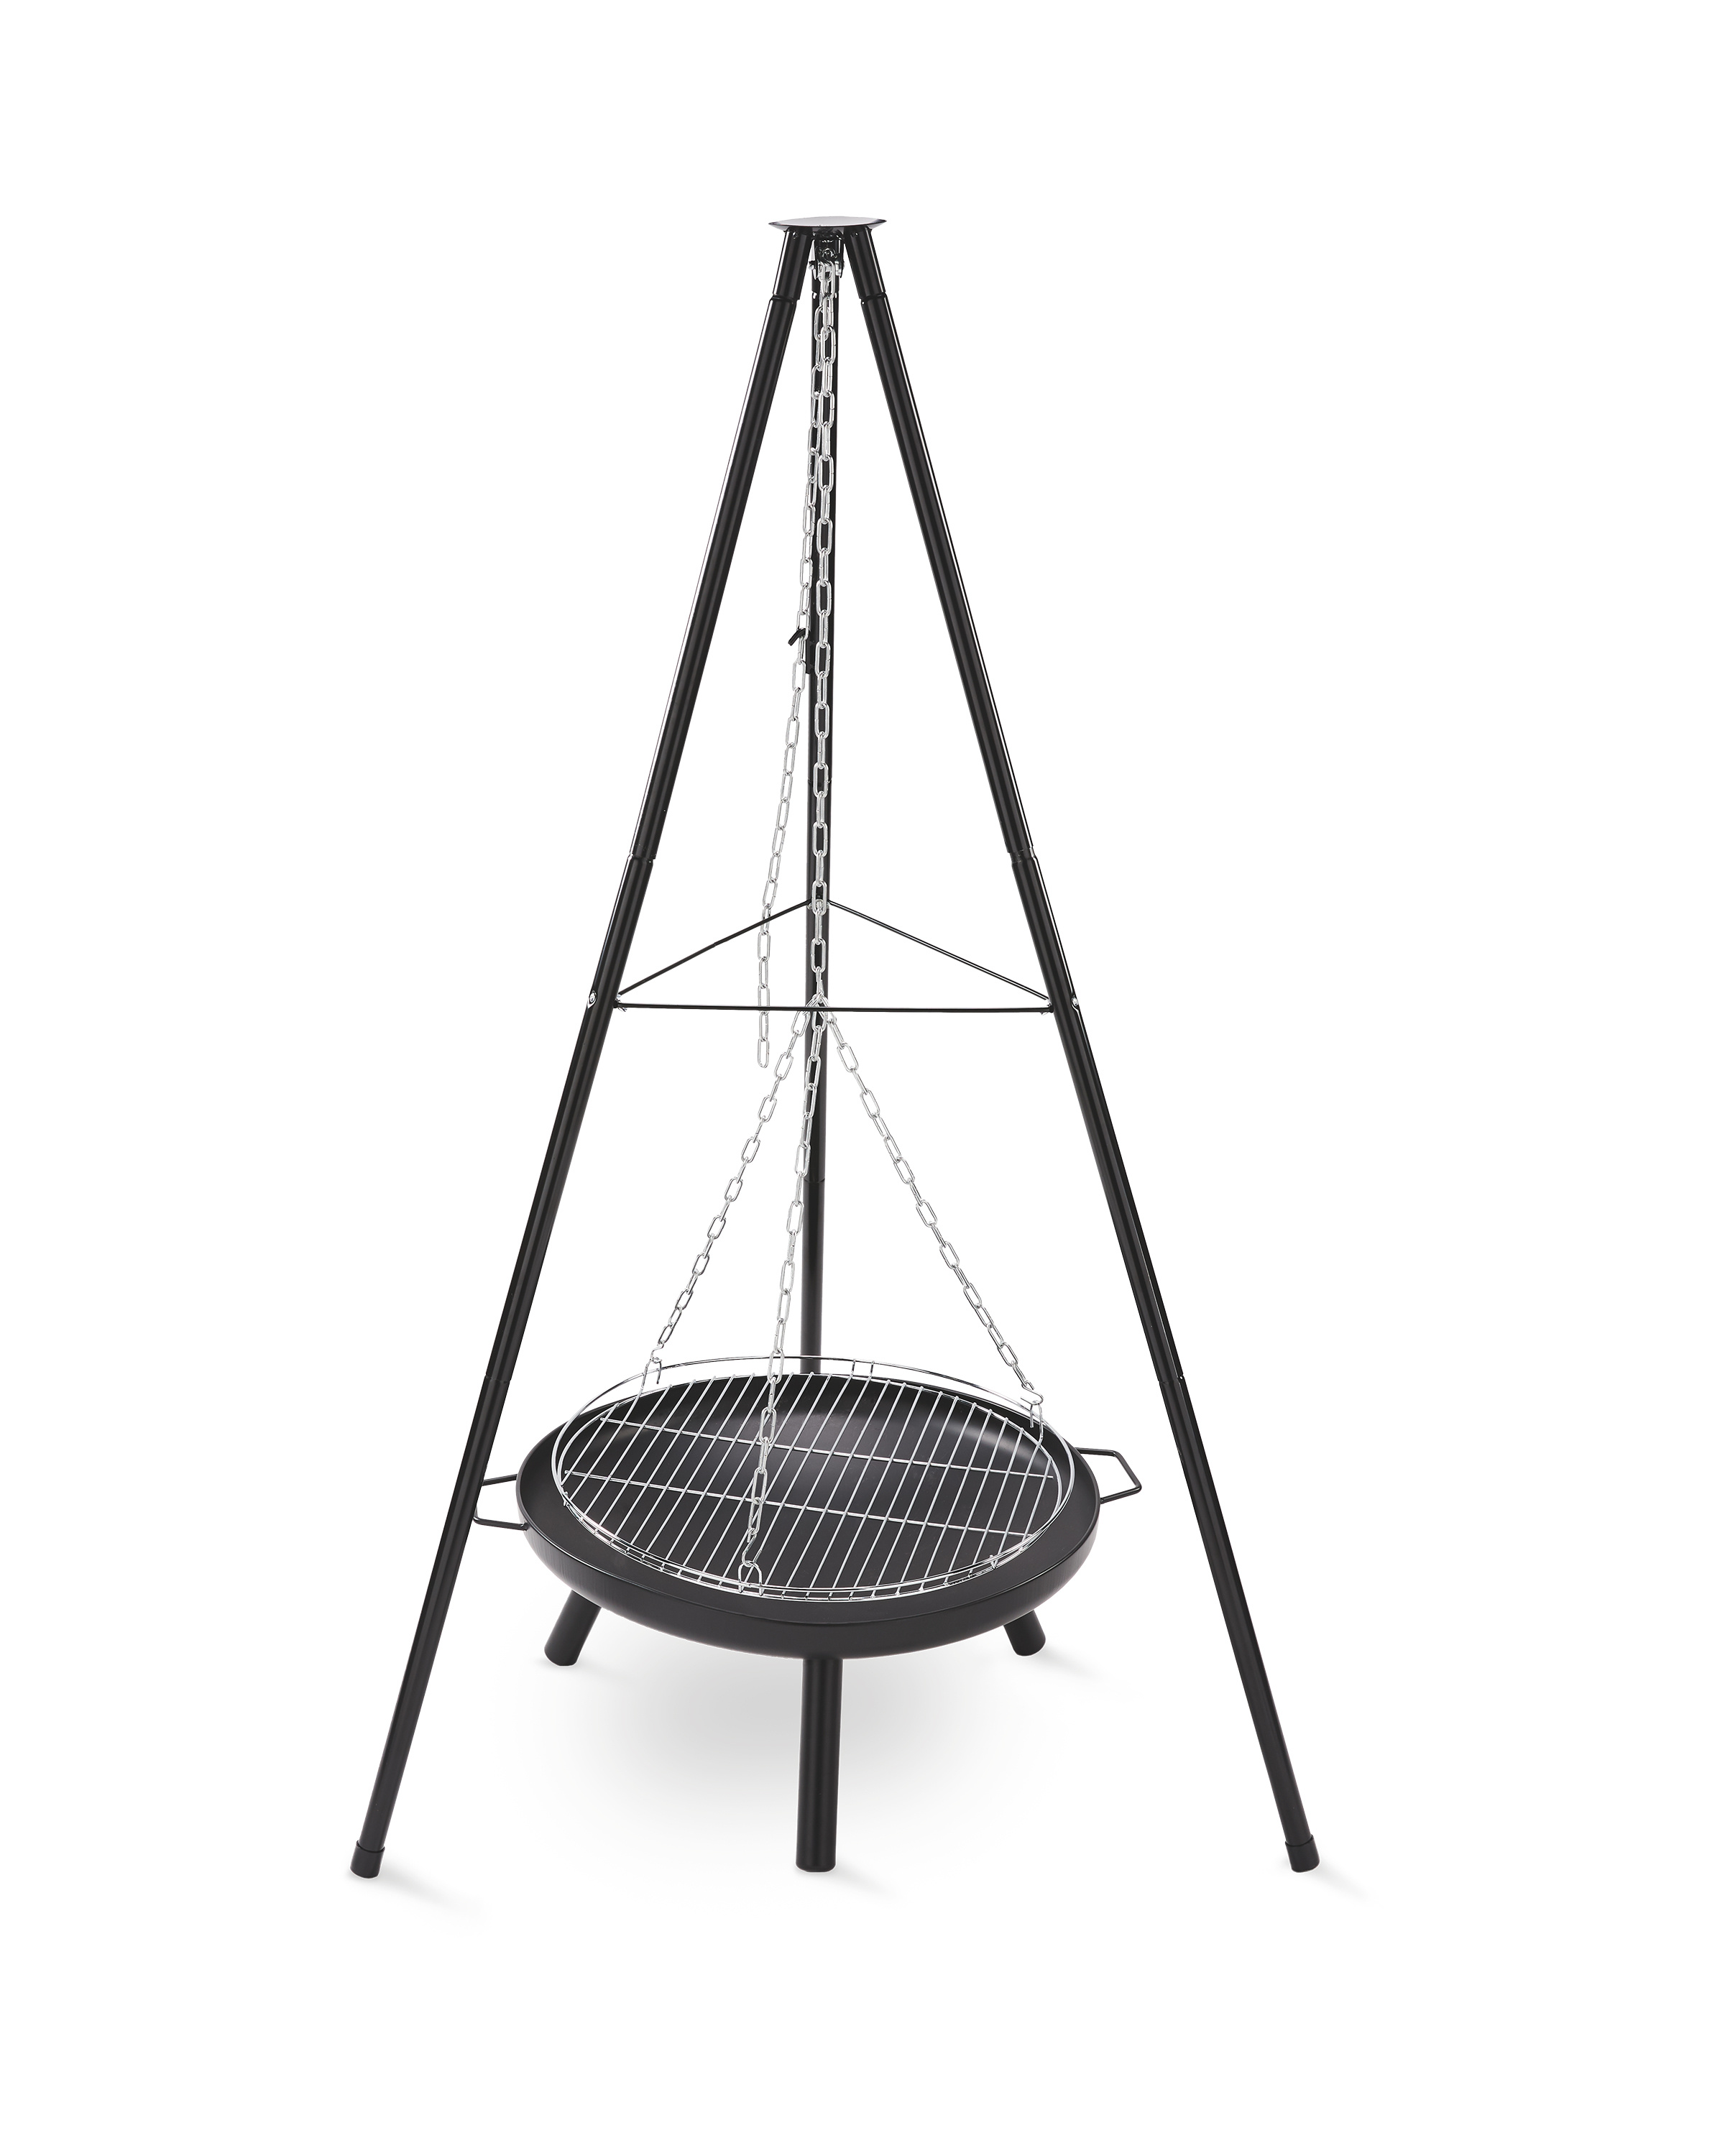 Gardenline Tripod Camping Firepit Aldi Uk, Fire Pit Tripod With Adjustable Hanging Grill